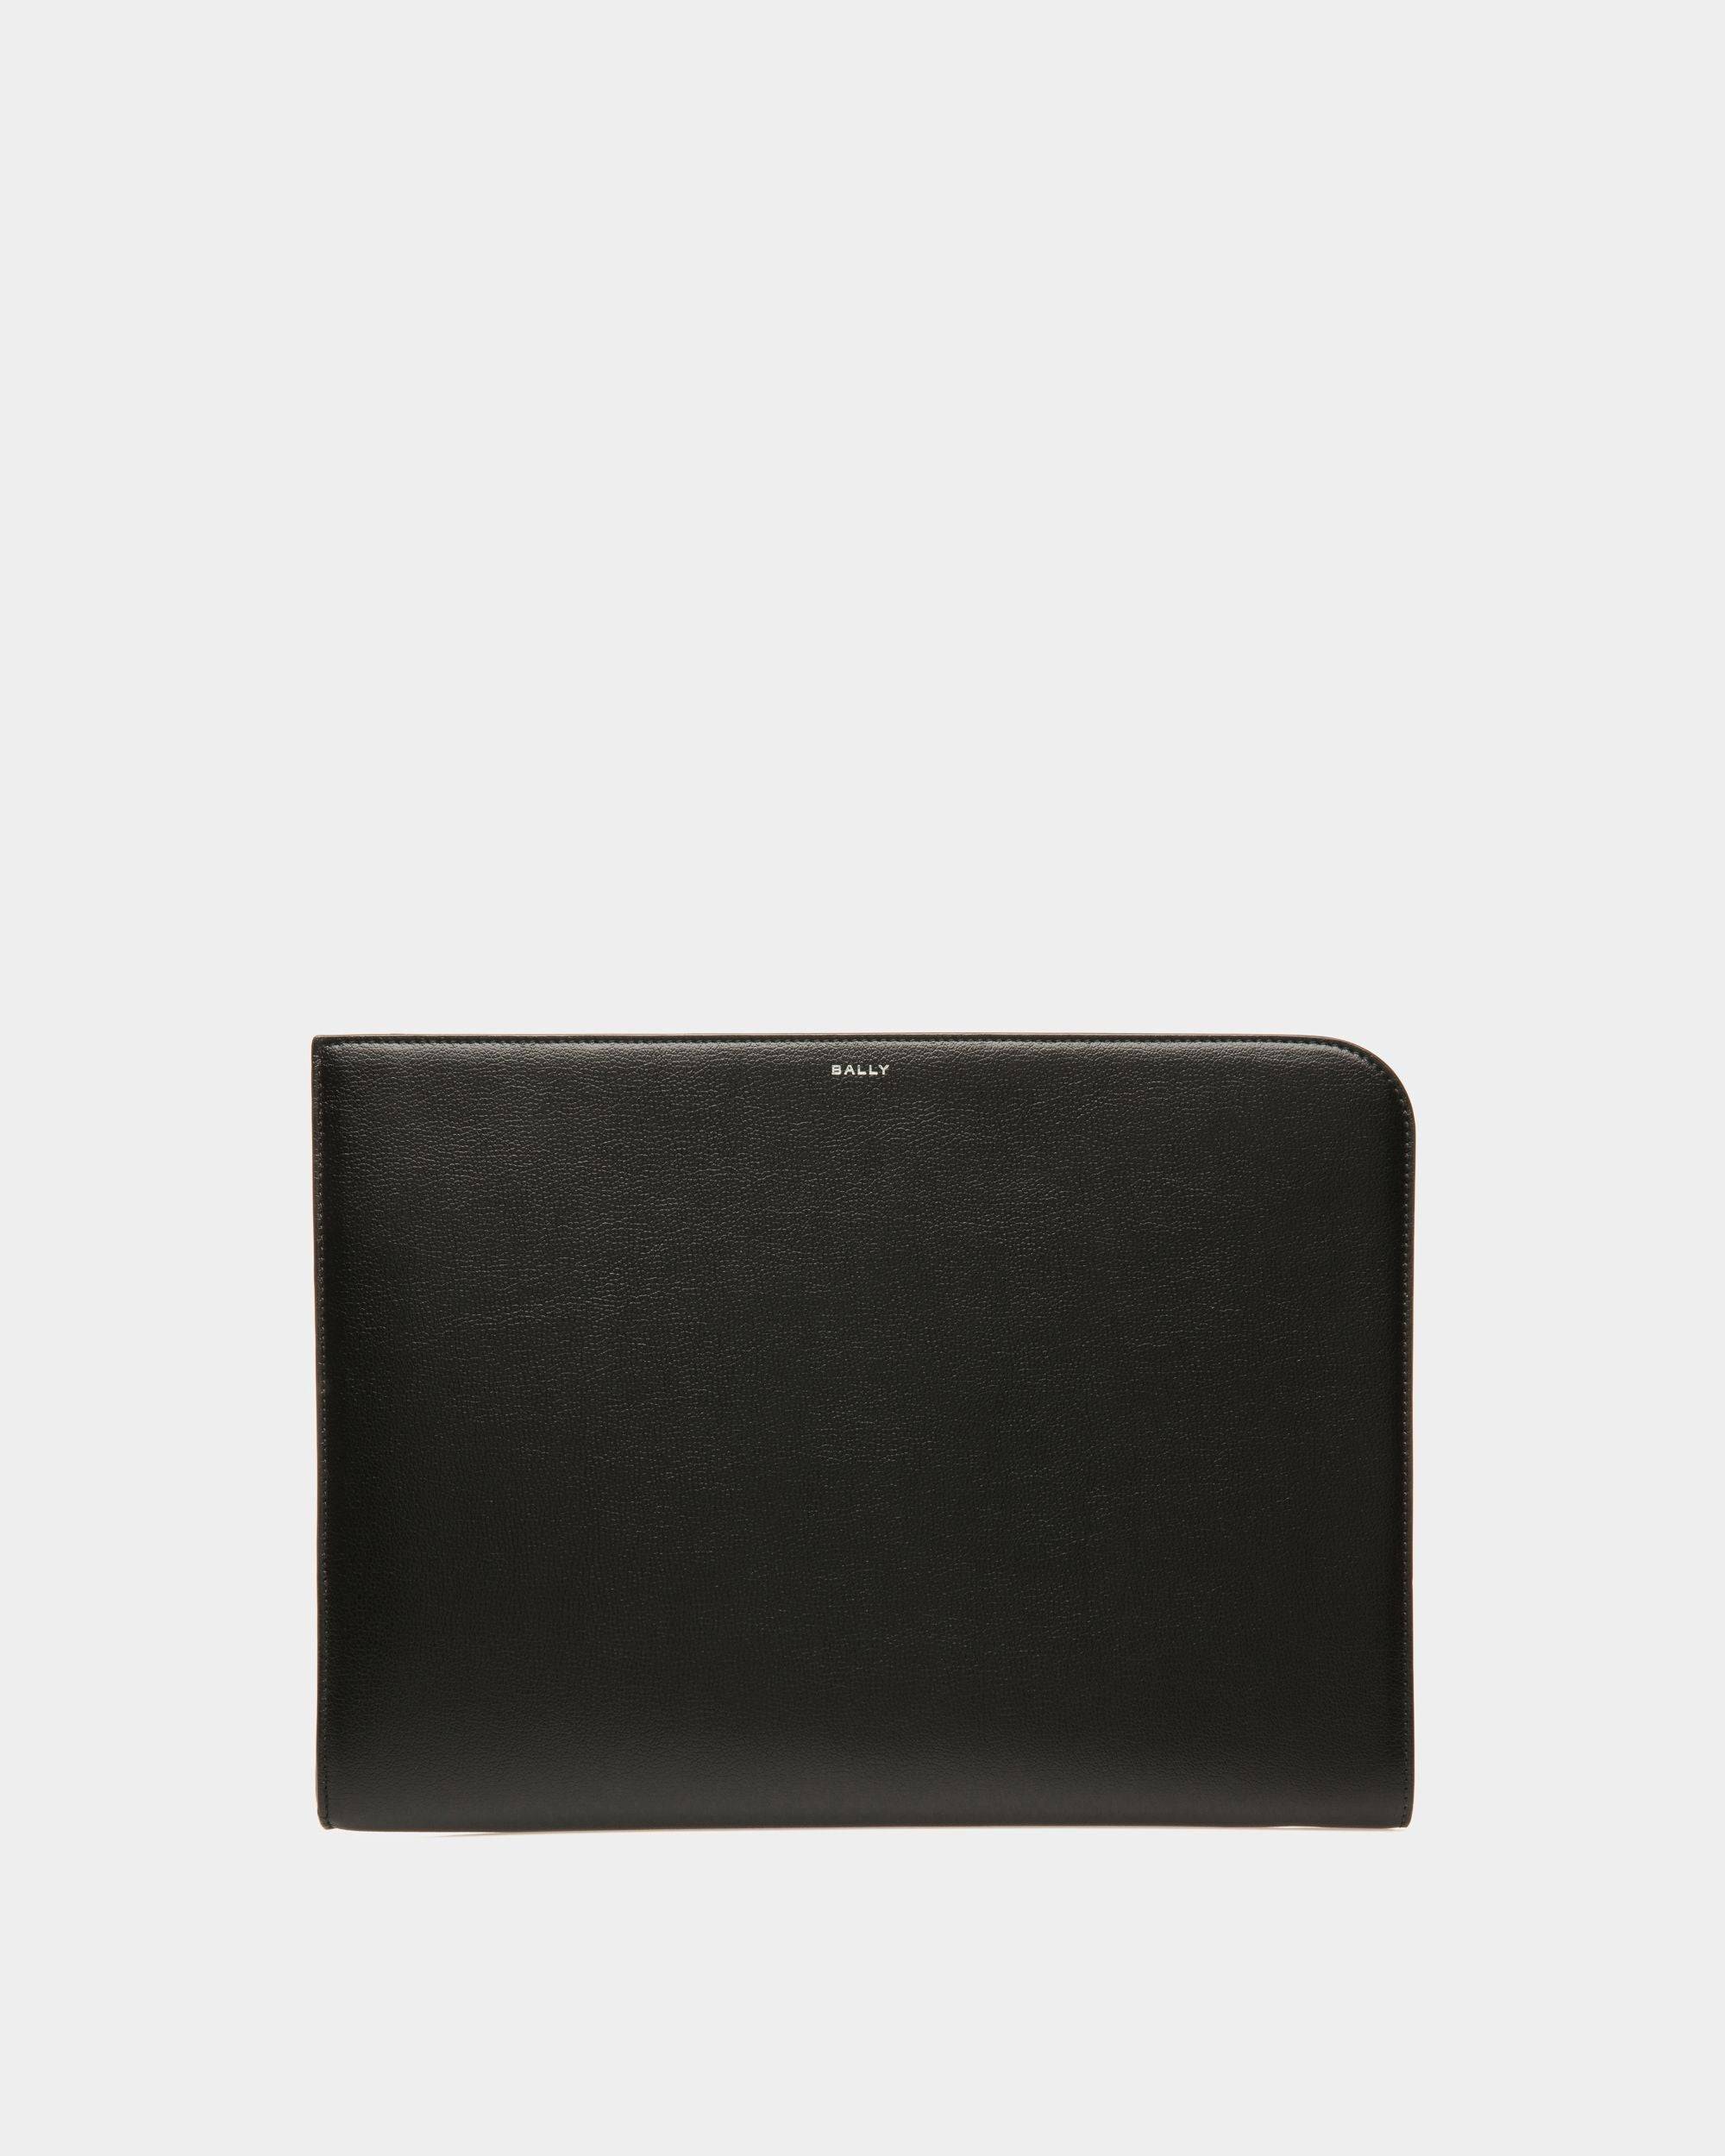 Men's Banque Necessaire In Black Leather | Bally | Still Life Front